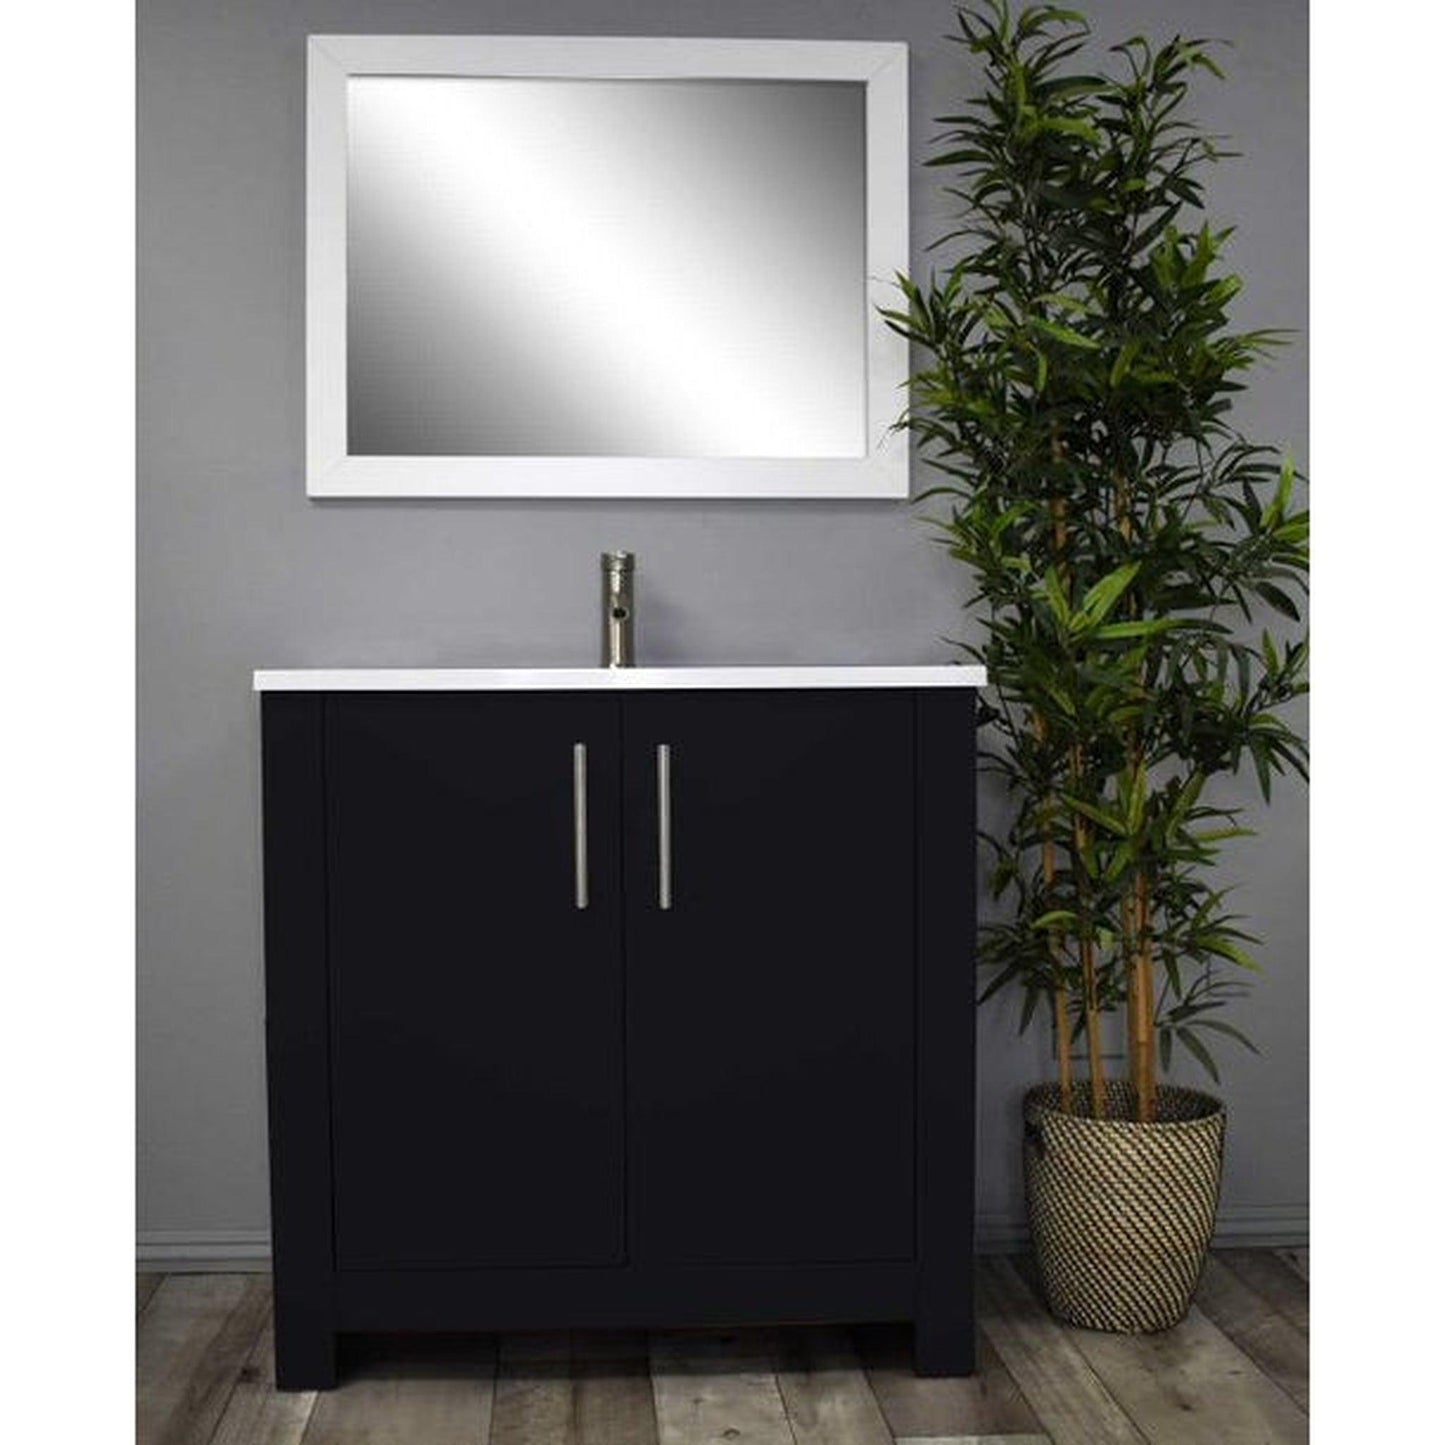 Volpa USA Austin 36" x 20" Glossy Black Modern Freestanding Bathroom Vanity With Acrylic Top, Integrated Acrylic Sink And Brushed Nickel Handles